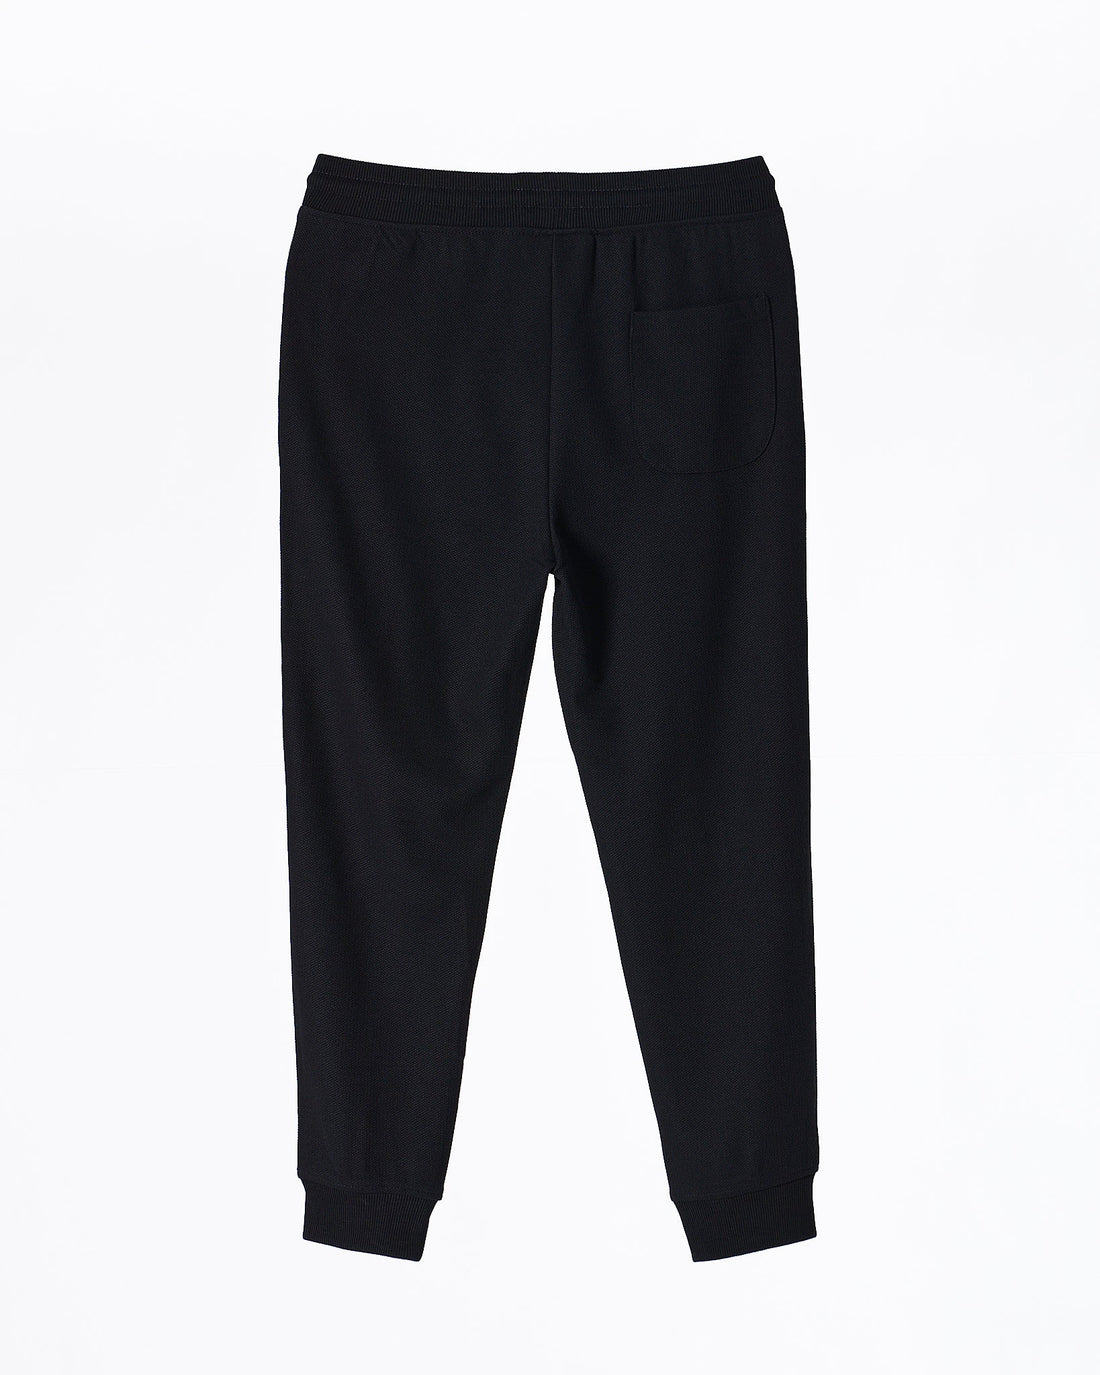 MOI OUTFIT-Casual Fit Men Black Joggers 19.90